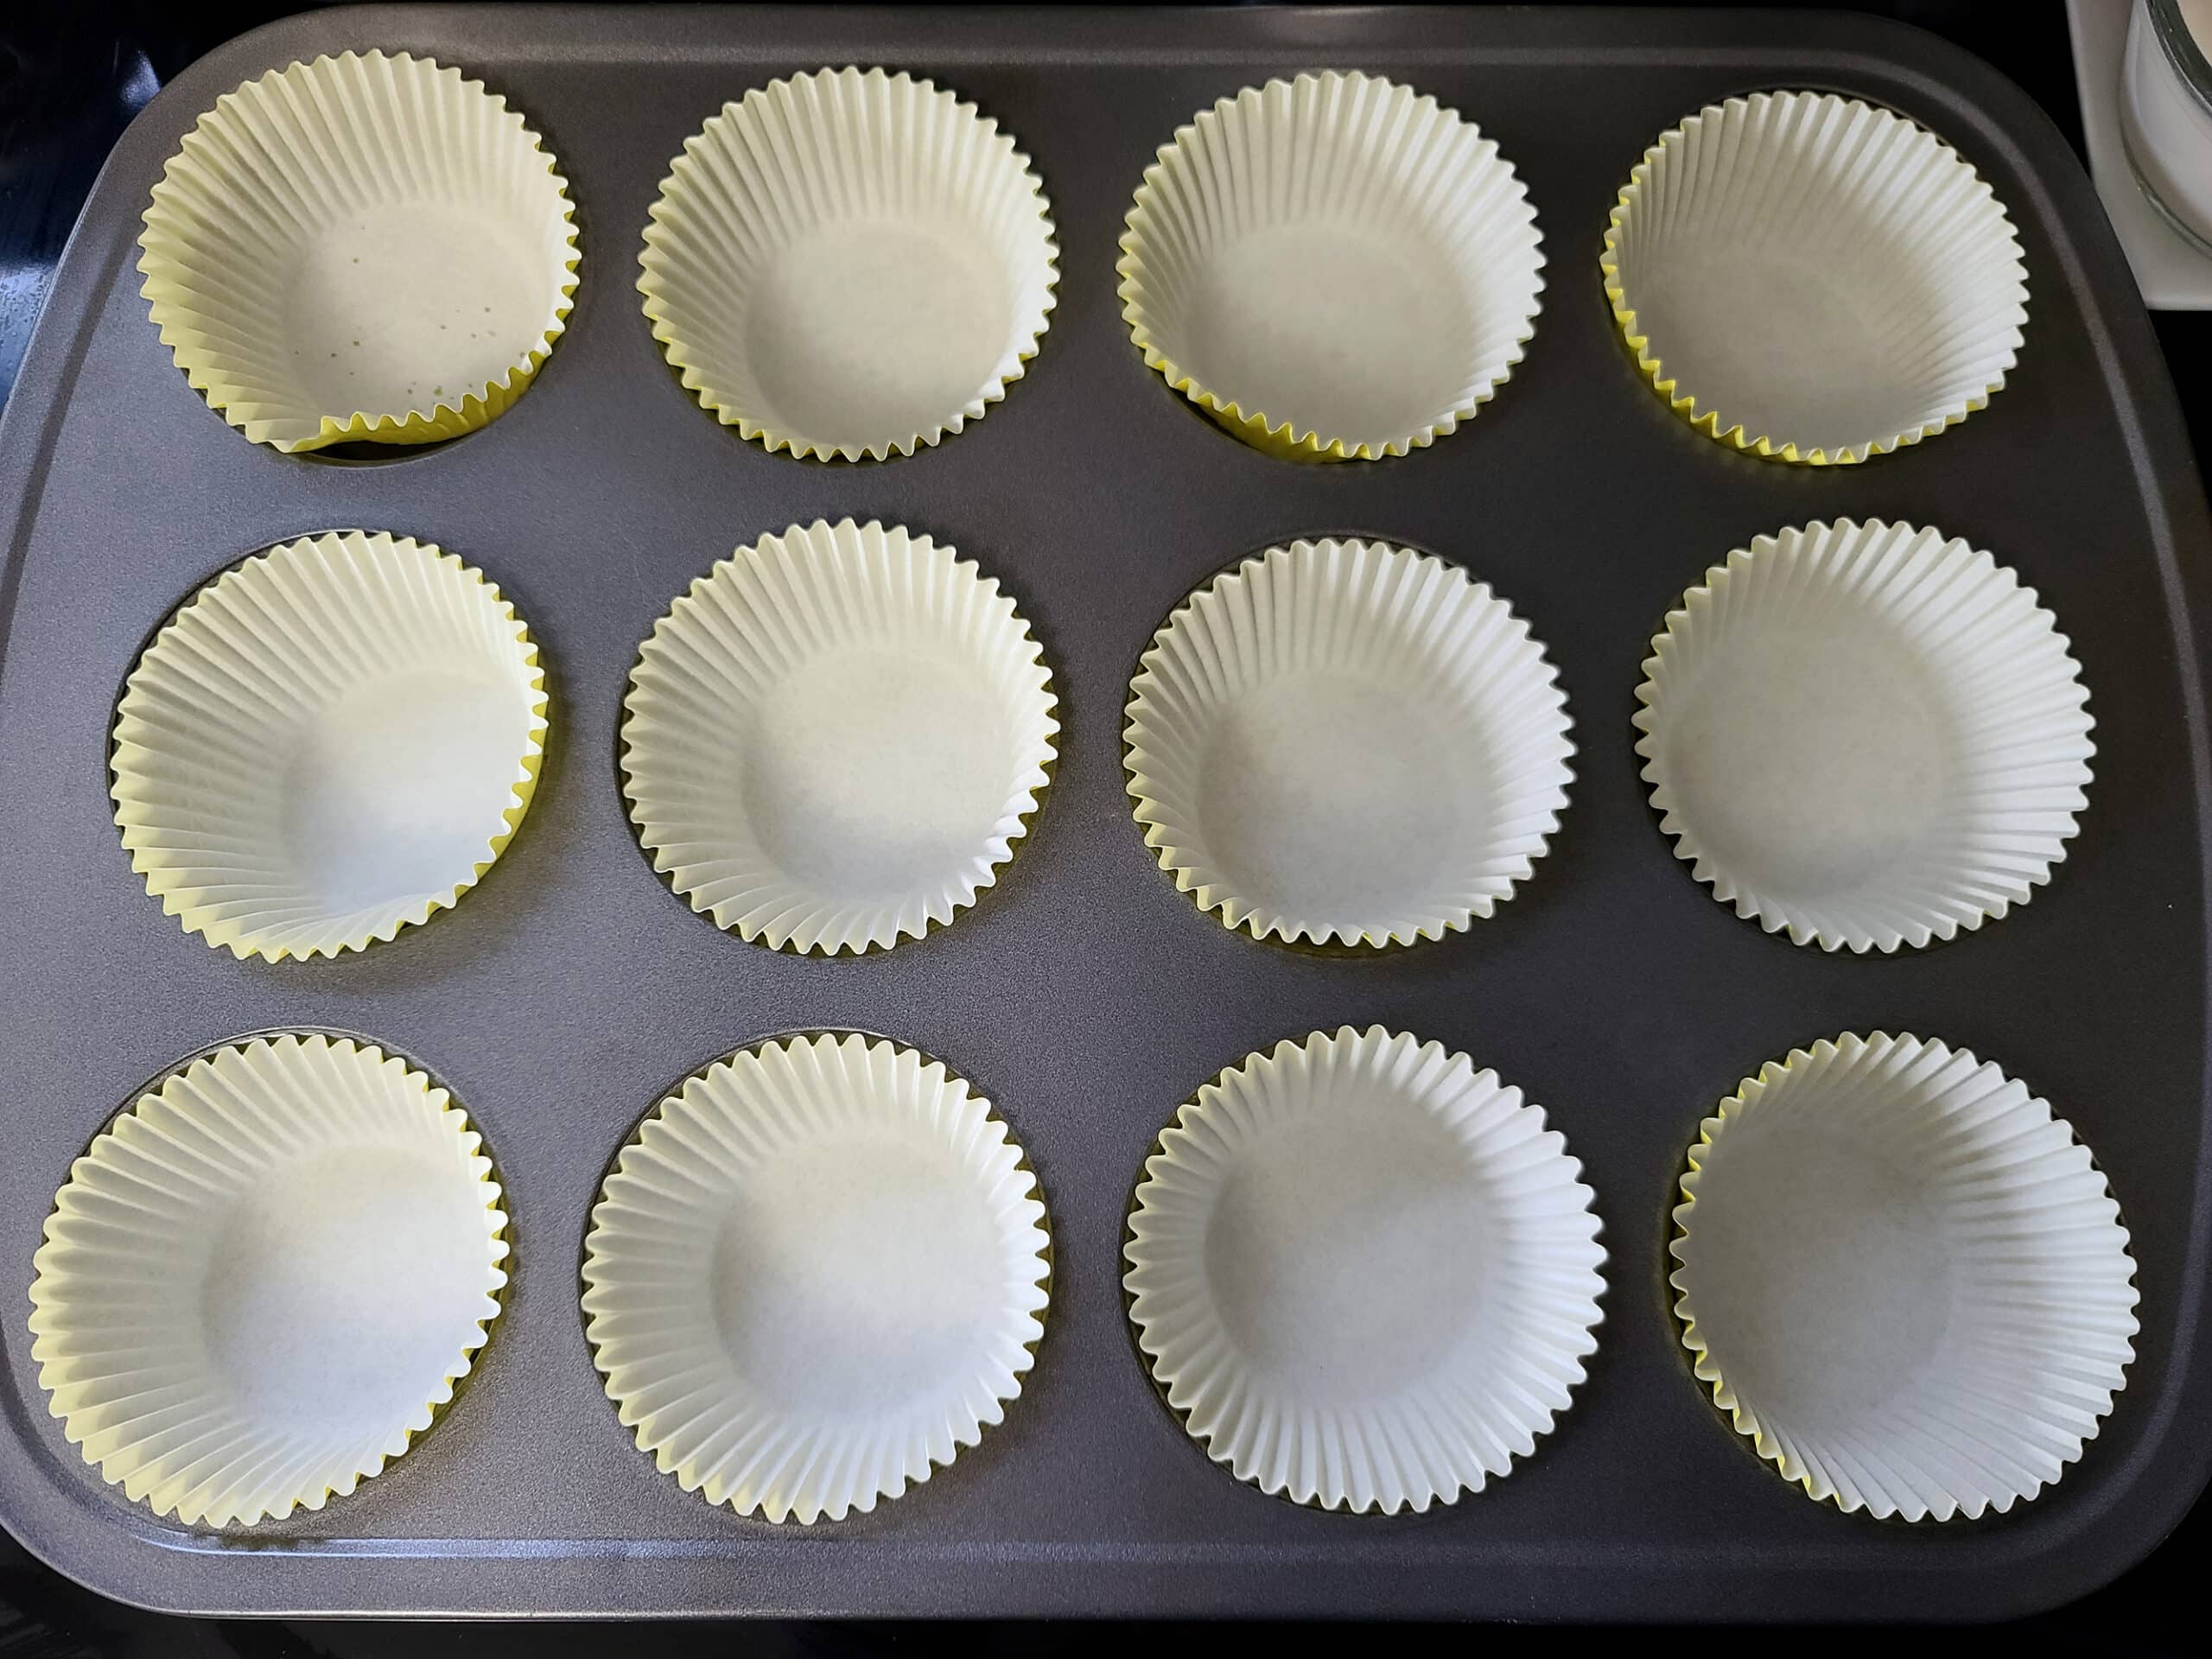 A muffin pan lined with white cupcake liners.